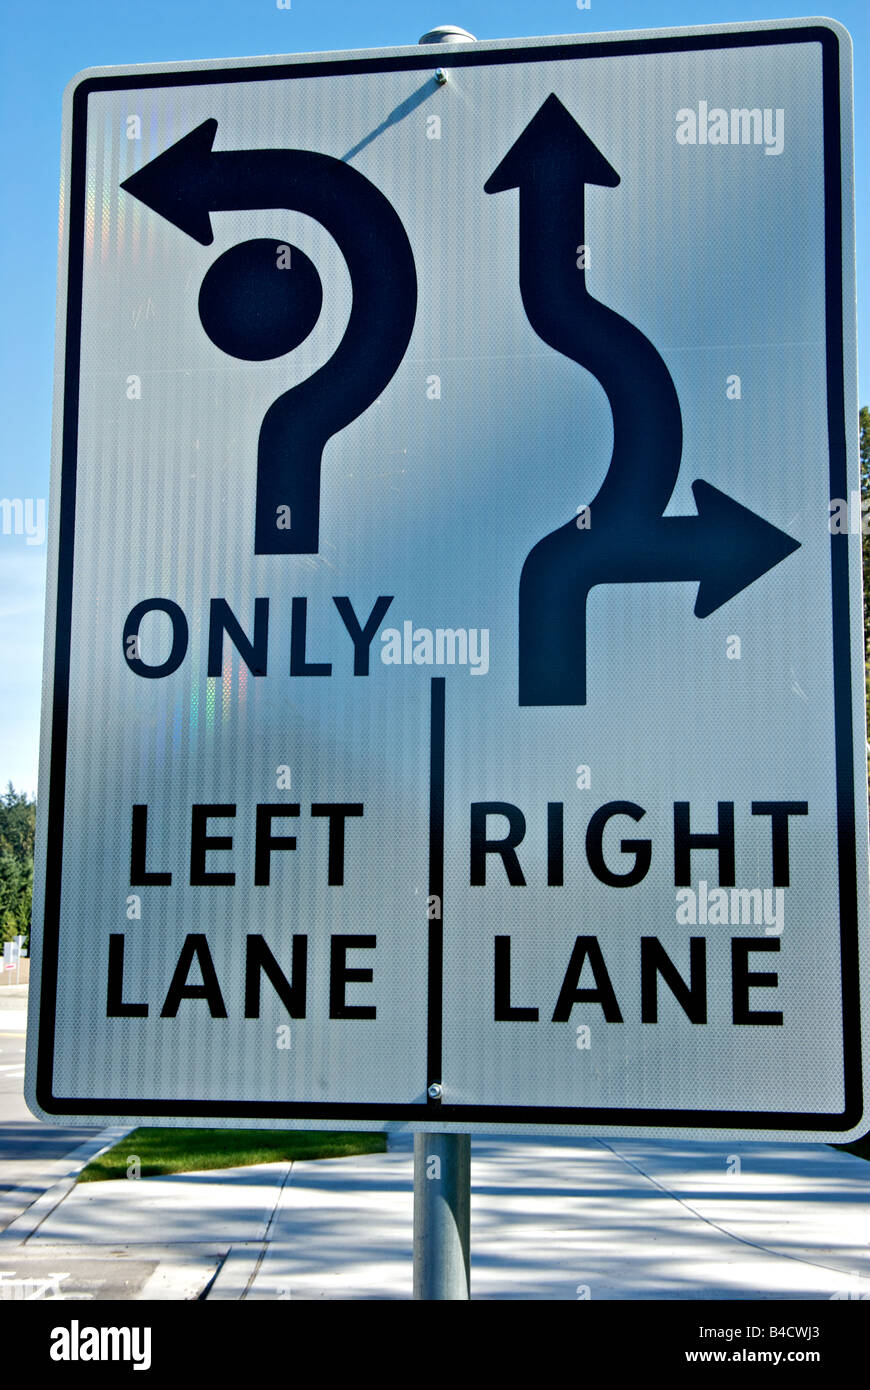 Reflective roundabout traffic lane control sign indicating lane a driver should be in to turn left right or continue through Stock Photo